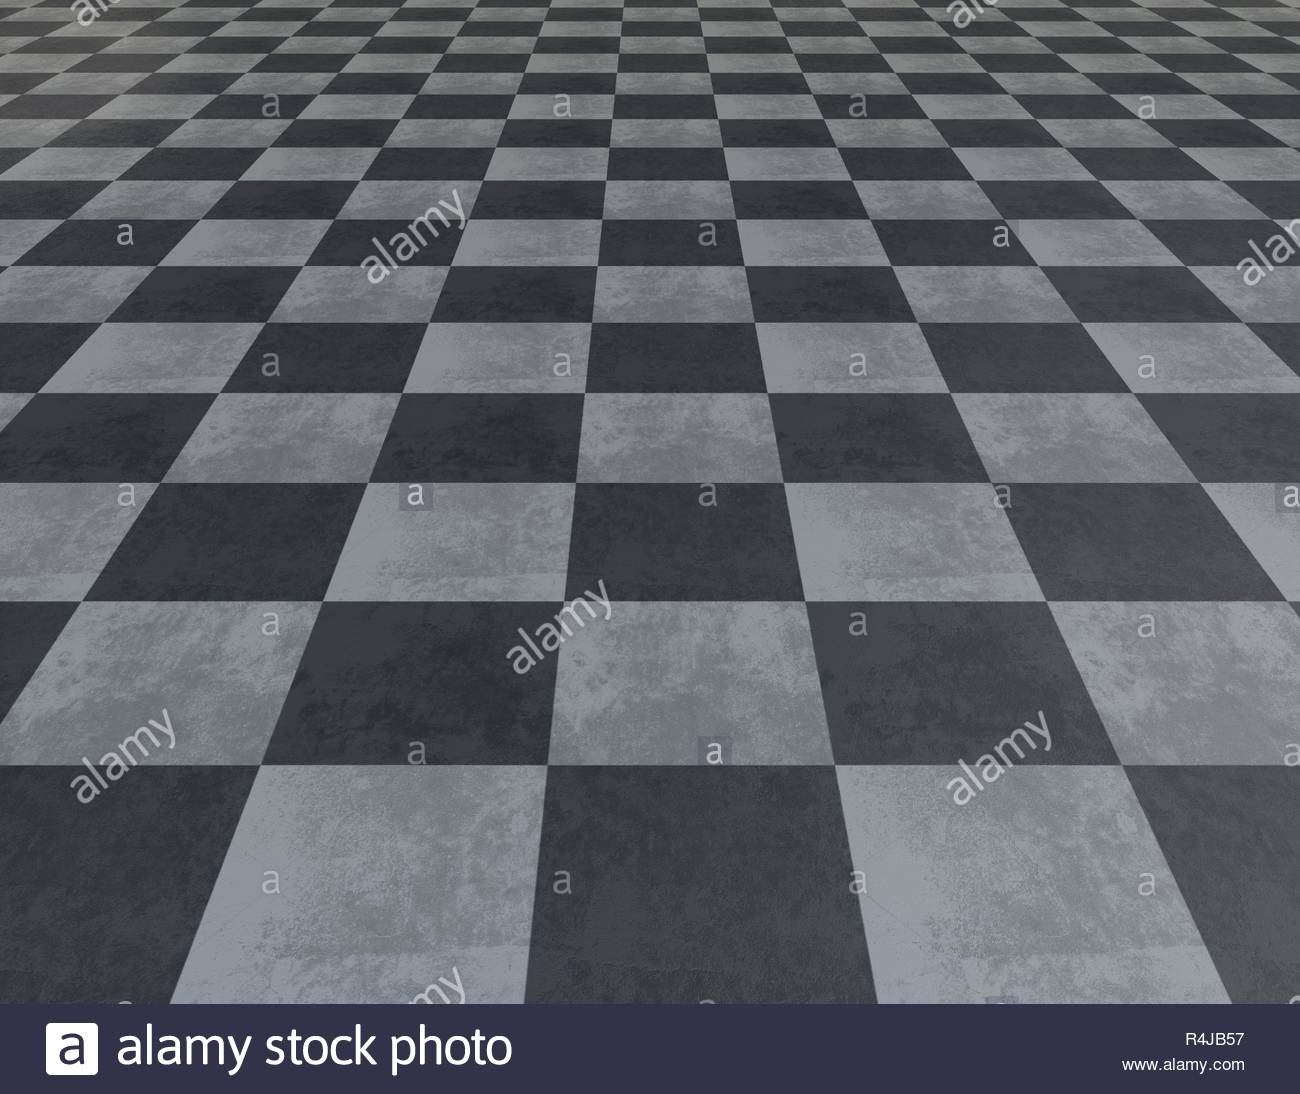 Tiled Checkered Black And White Marble Floor Texture Stock Photo